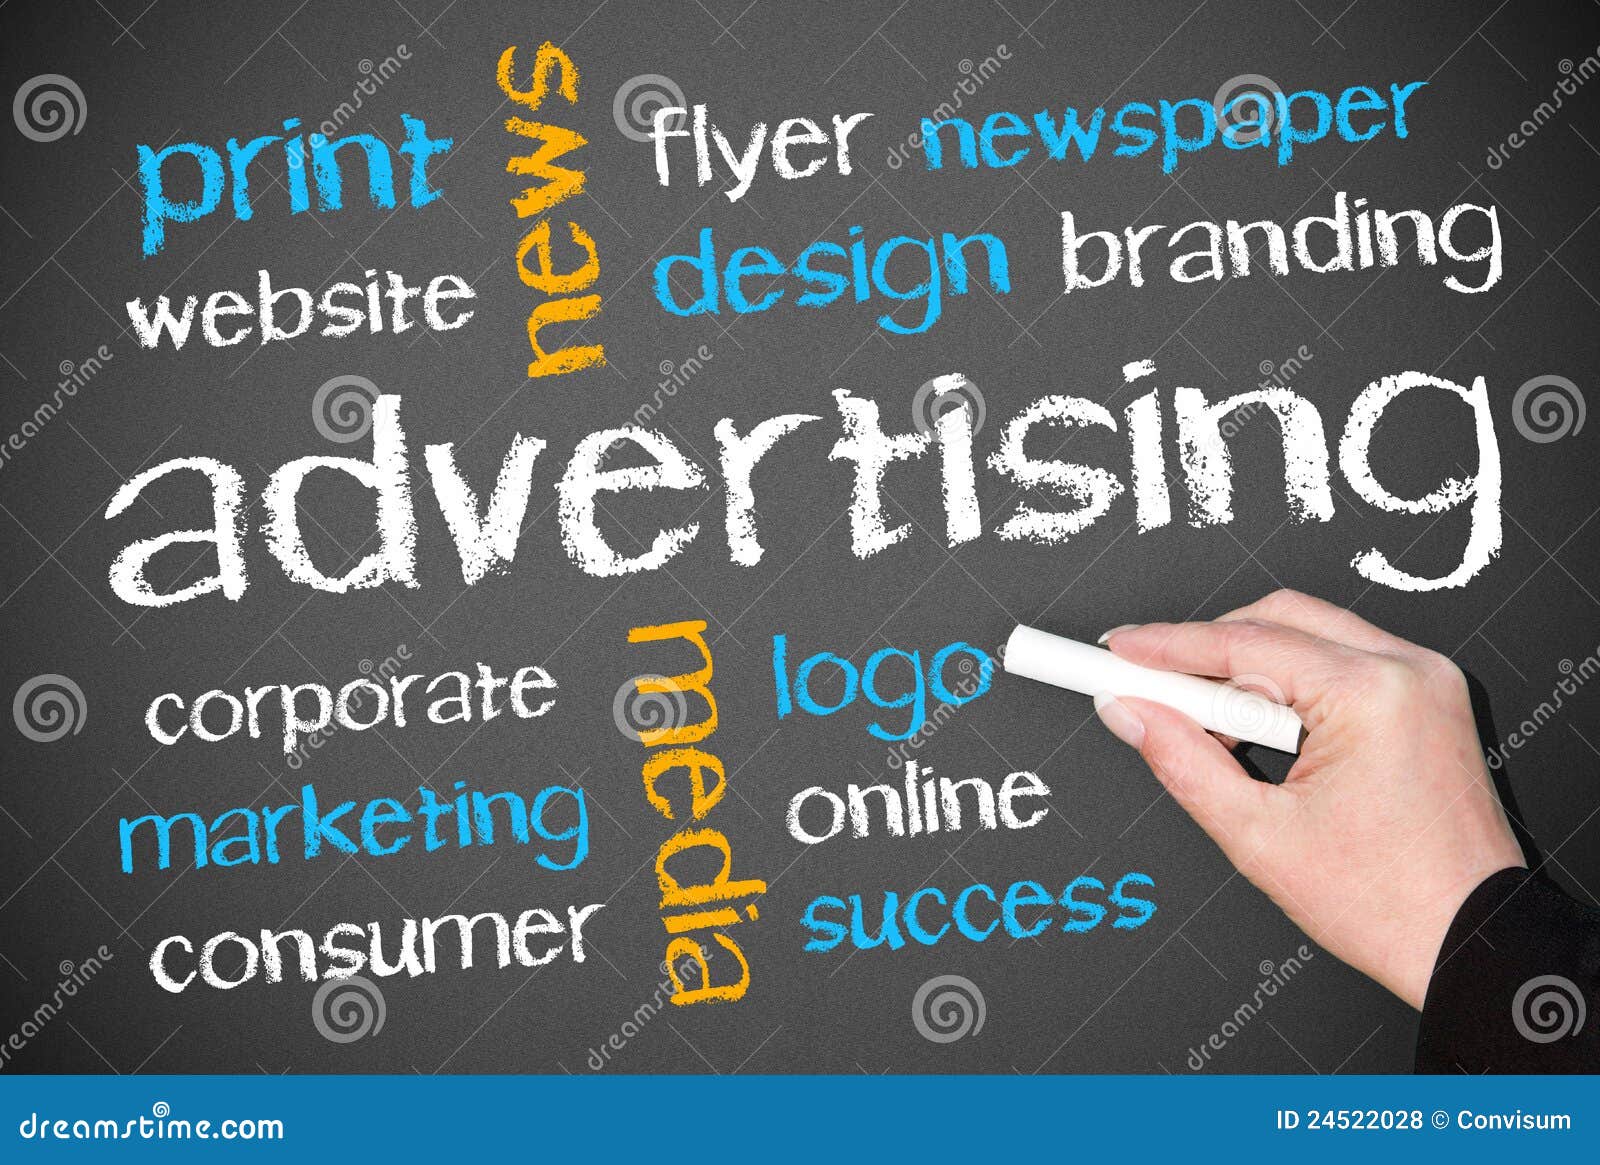 advertising methods and features